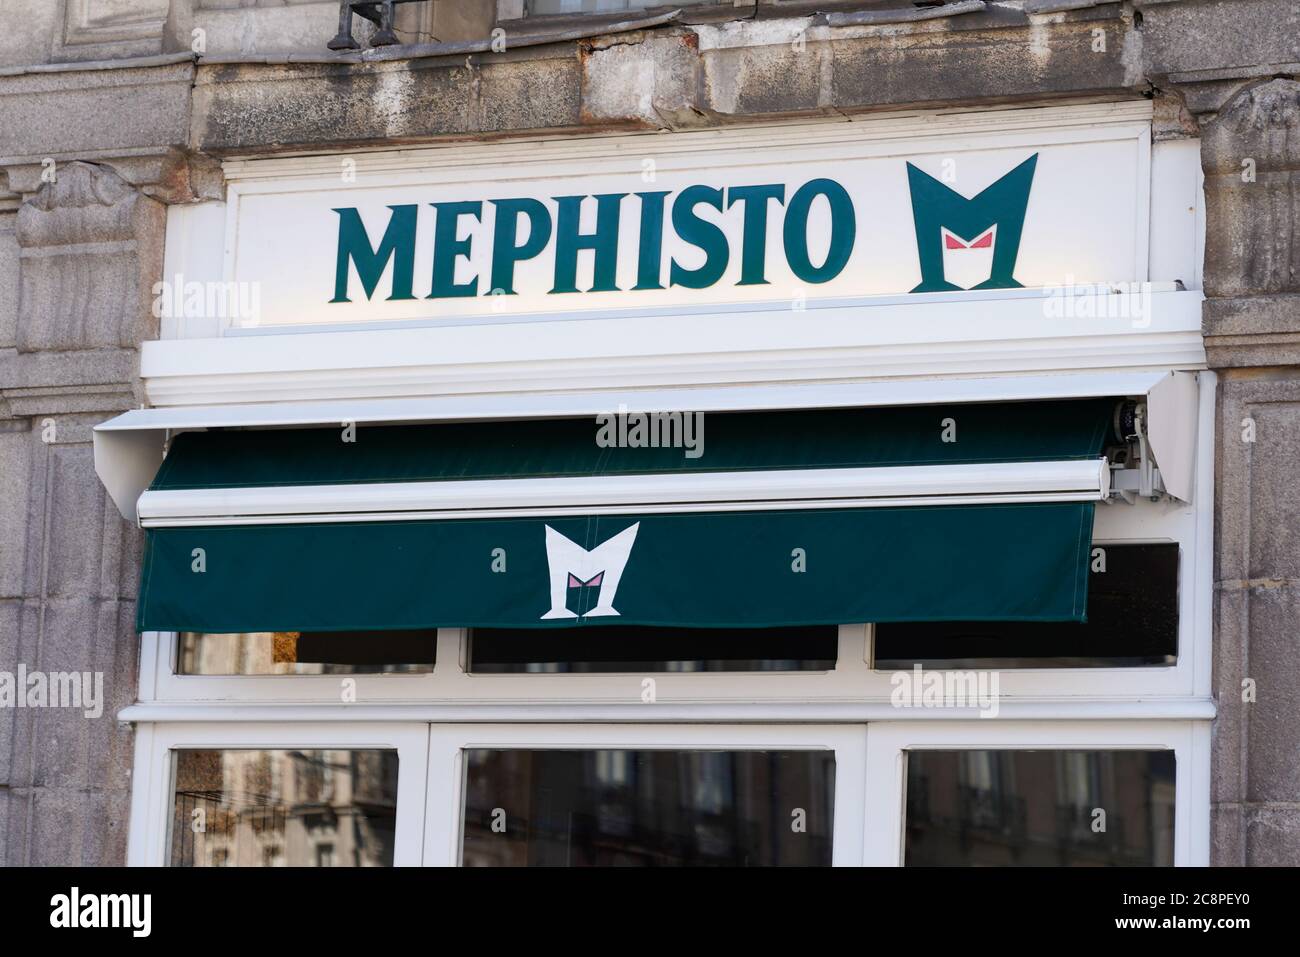 Bordeaux , Aquitaine / France - 07 22 2020 : Mephisto sign text and green  logo shop shoe for store of shoes and footwear manufacturer Stock Photo -  Alamy